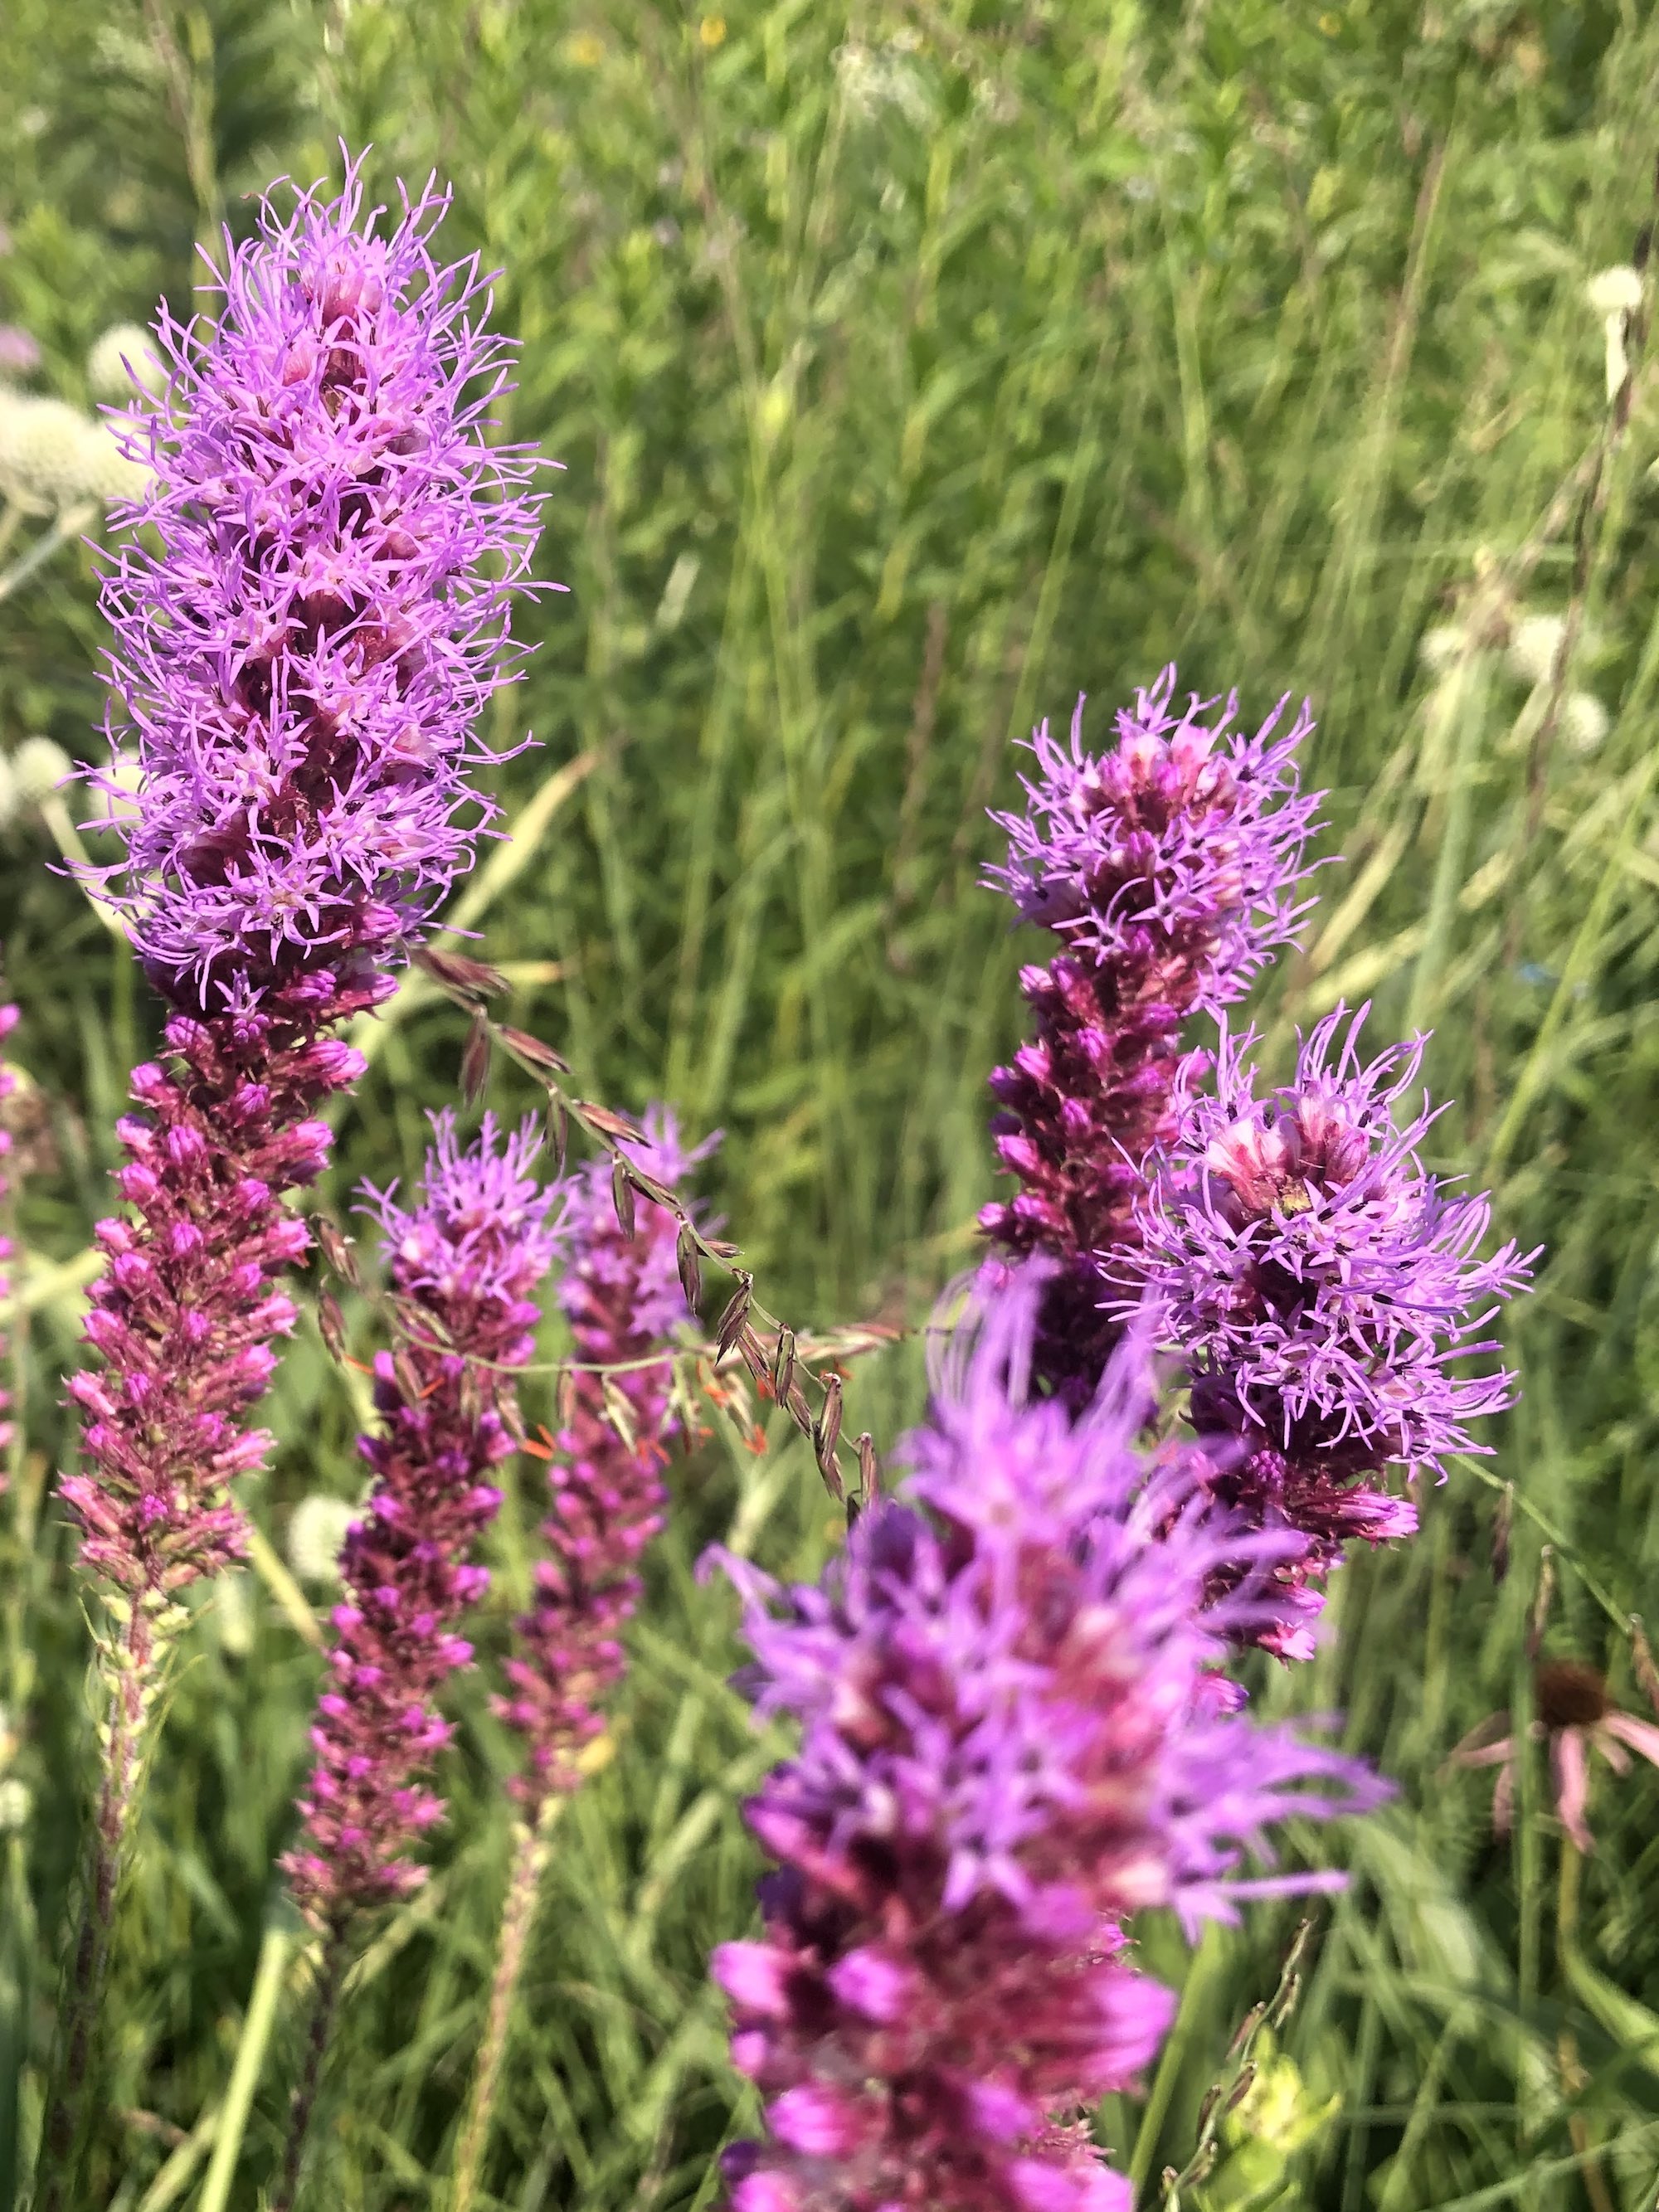 Dense Blazing Star off of Bike Path behind Gregory Street in Madison, Wisconsin on July 16, 2021.